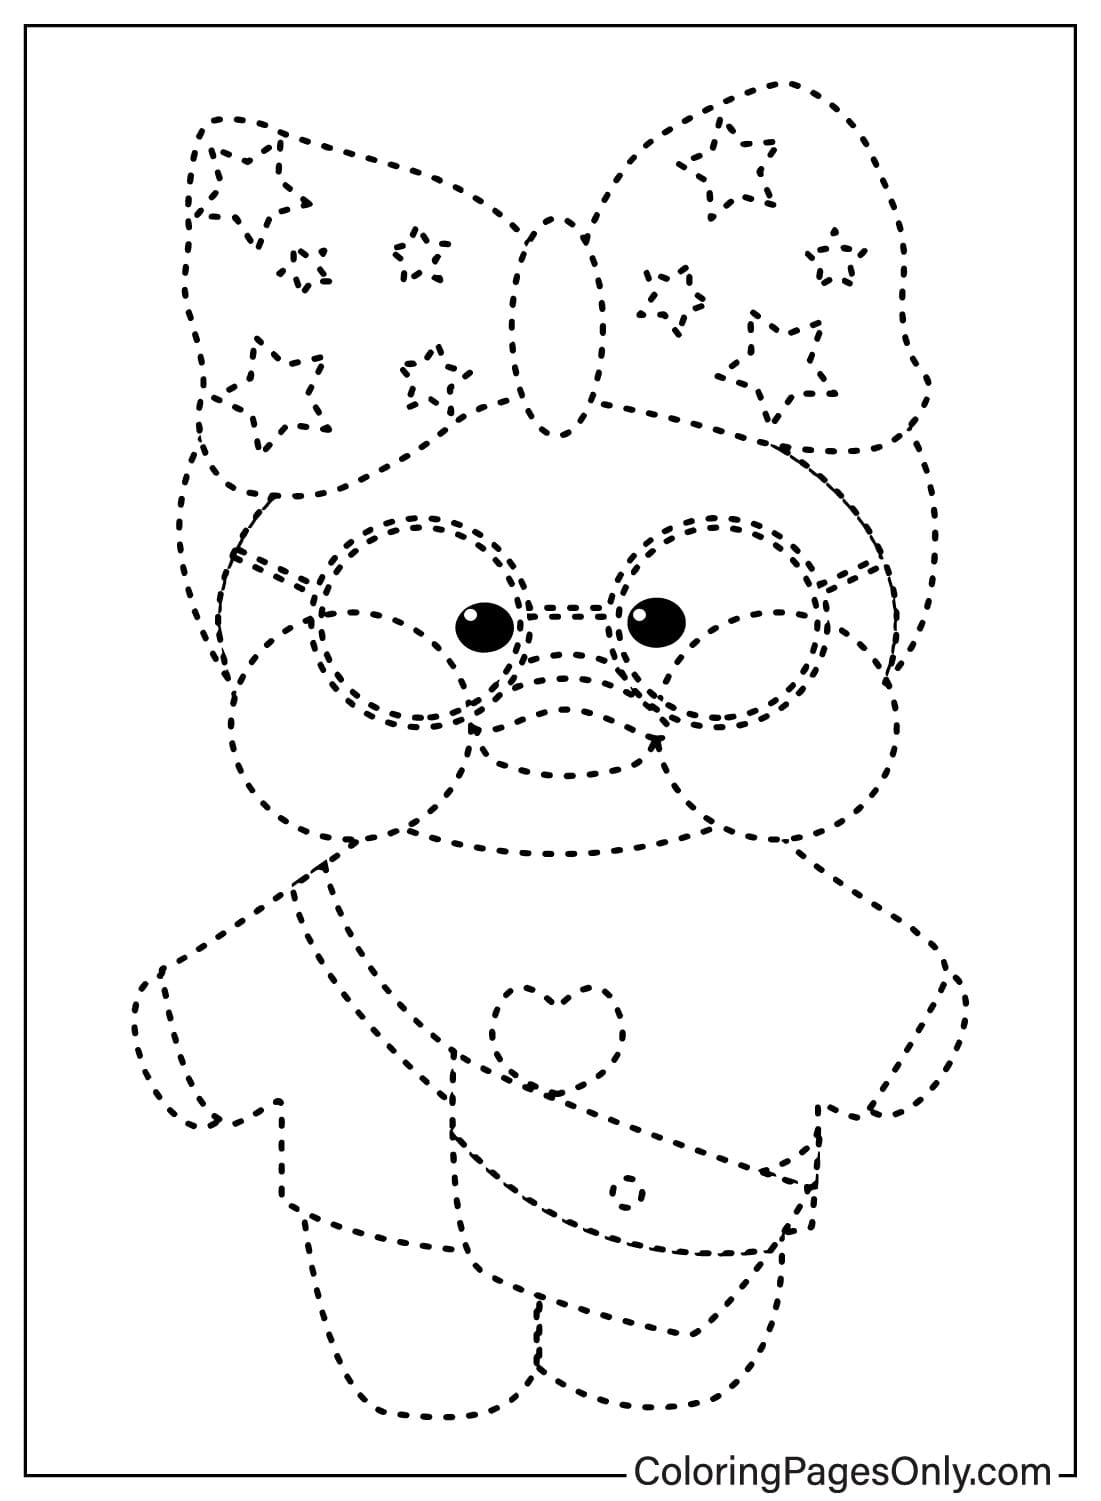 Tracing Coloring Page Free from Tracing